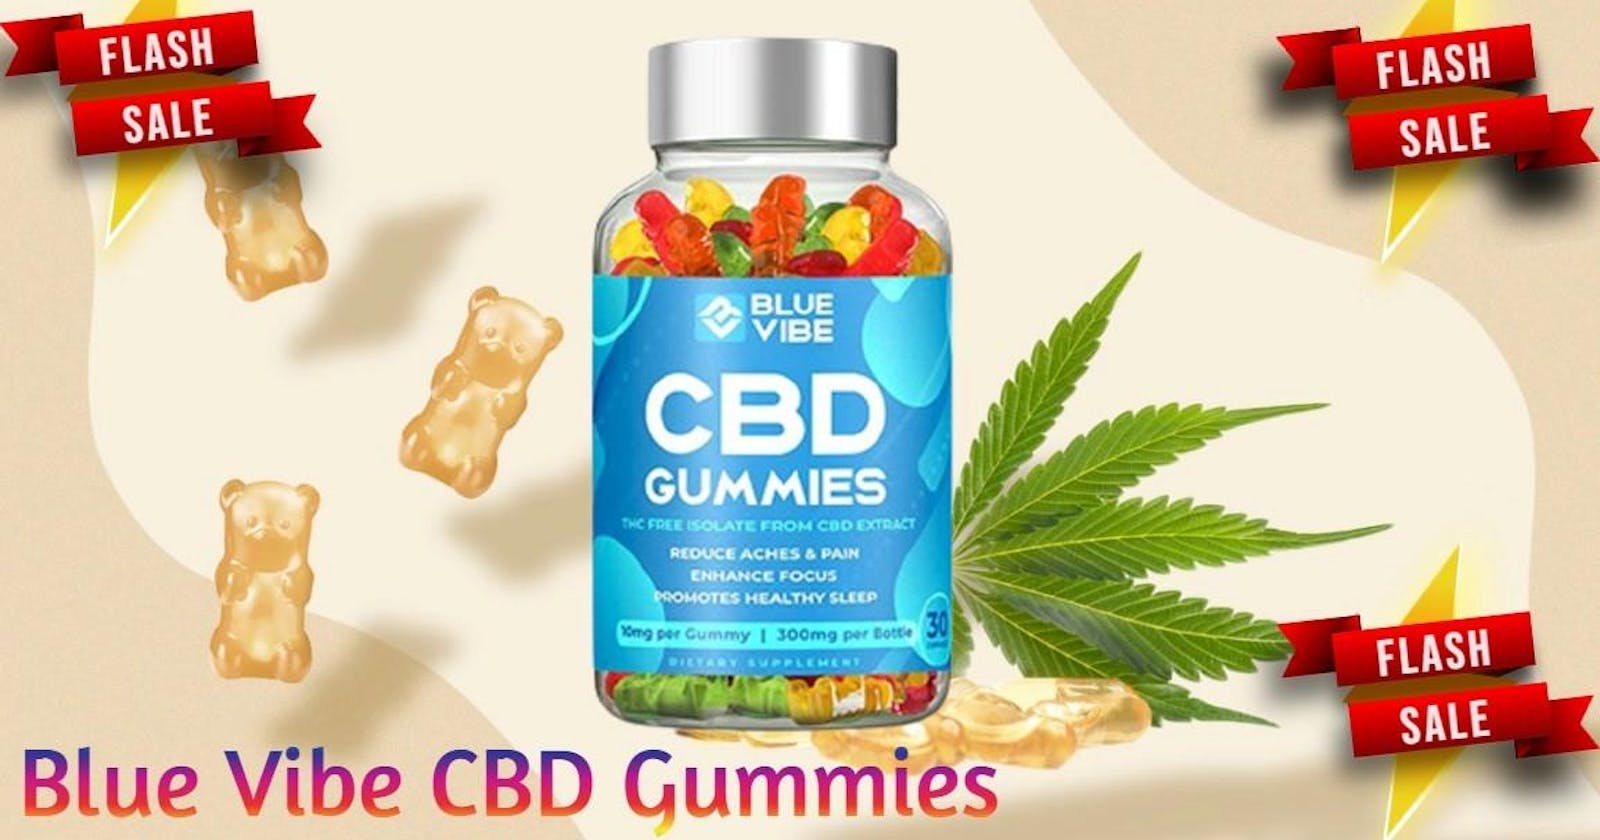 Blue Vibe CBD Gummies Reviews – Is It Safe & Effective? Read It Before Buy!